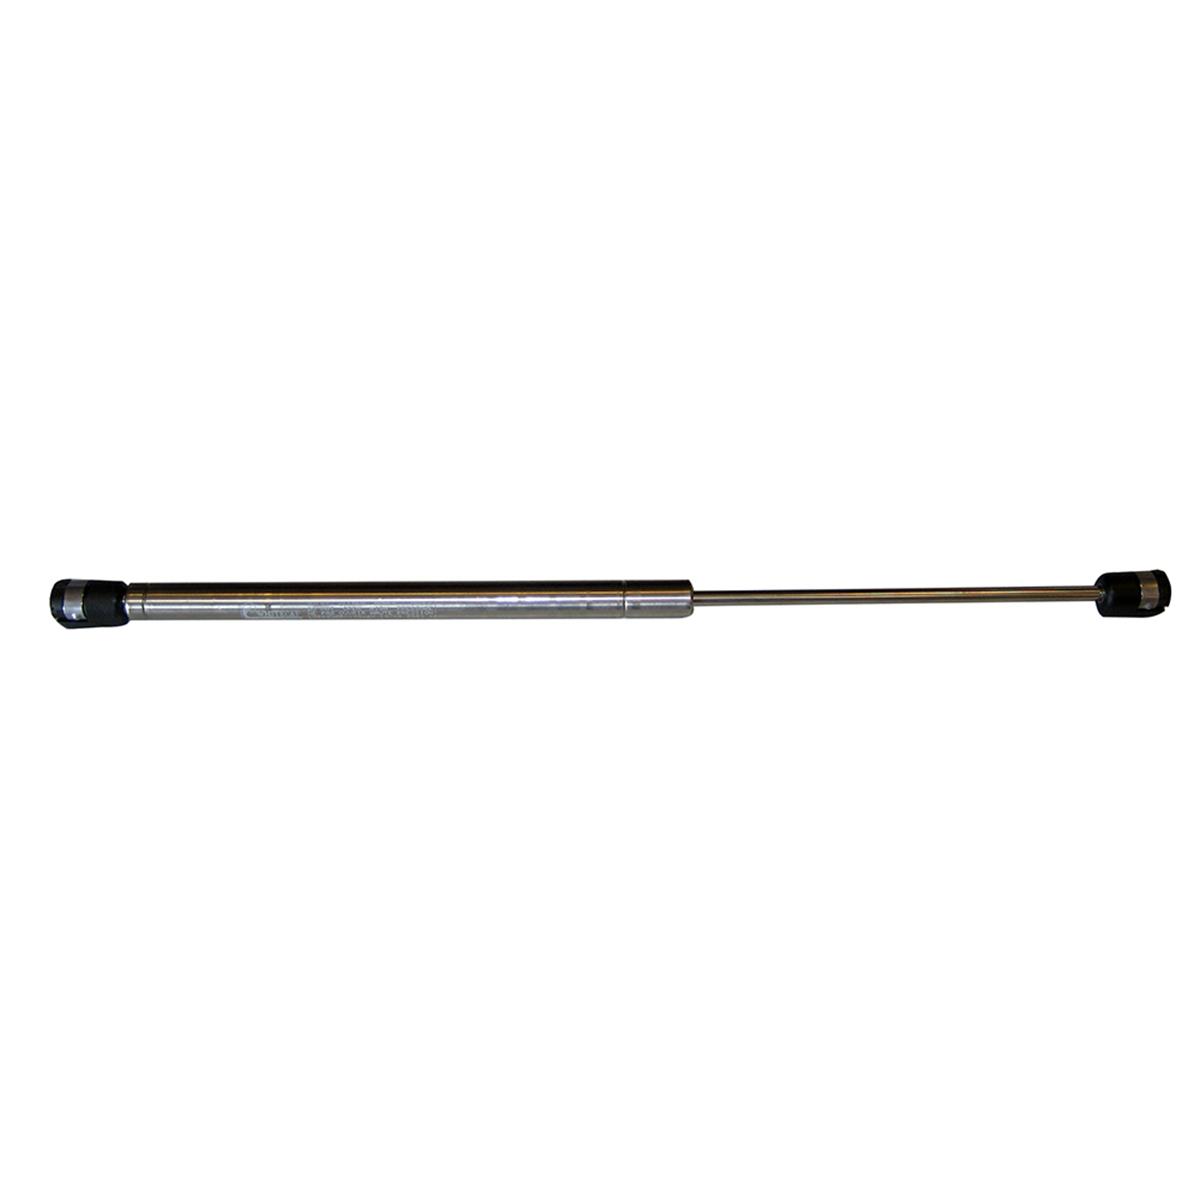 G-3040ssc 10 In. Gas Spring, Stainless Steel - 40 Lbs